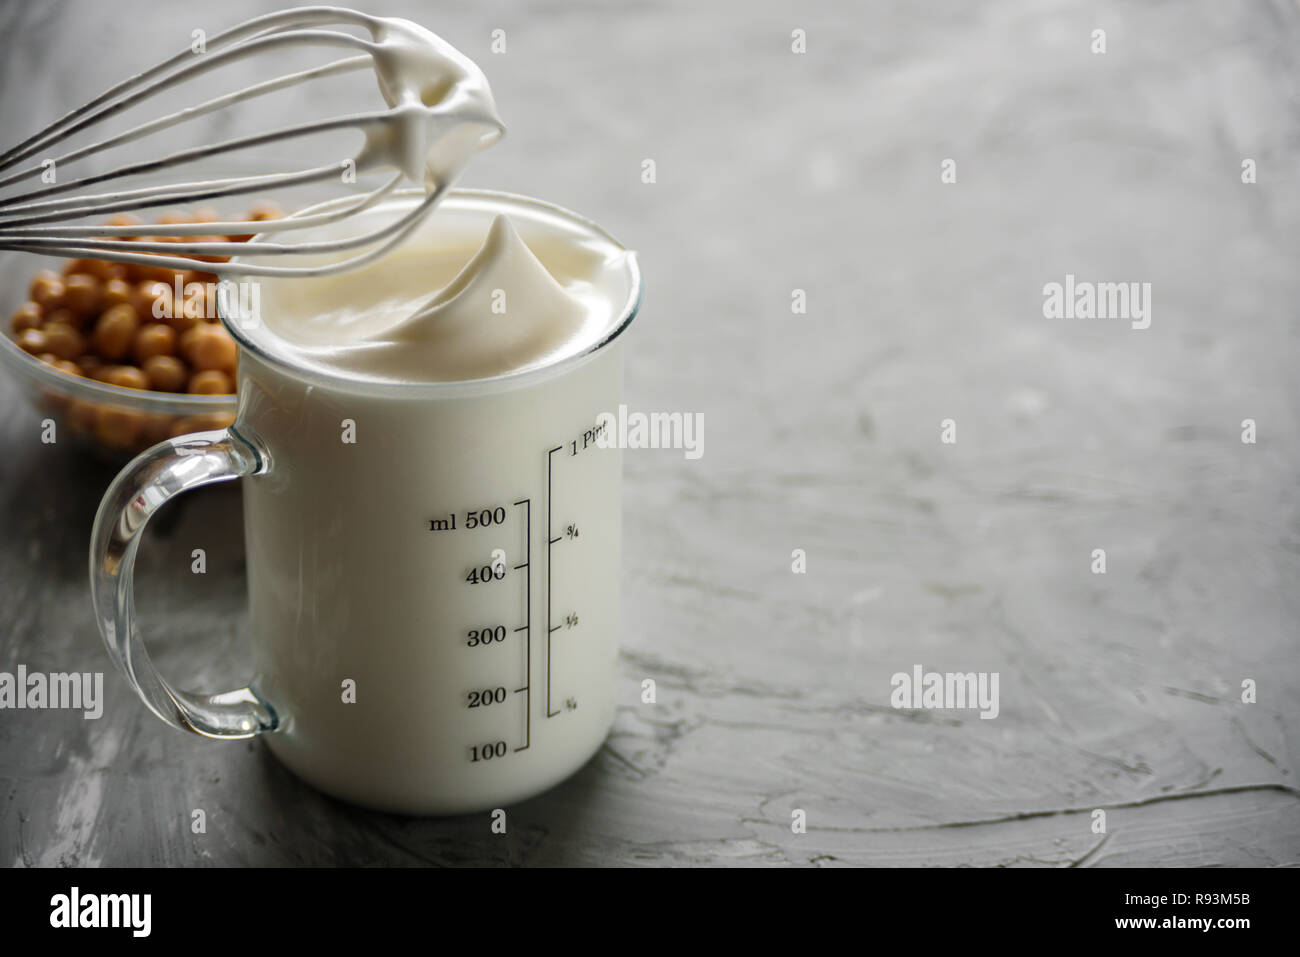 Chickpea water aquafaba whipped. Egg replacement. Vegan concept Stock Photo